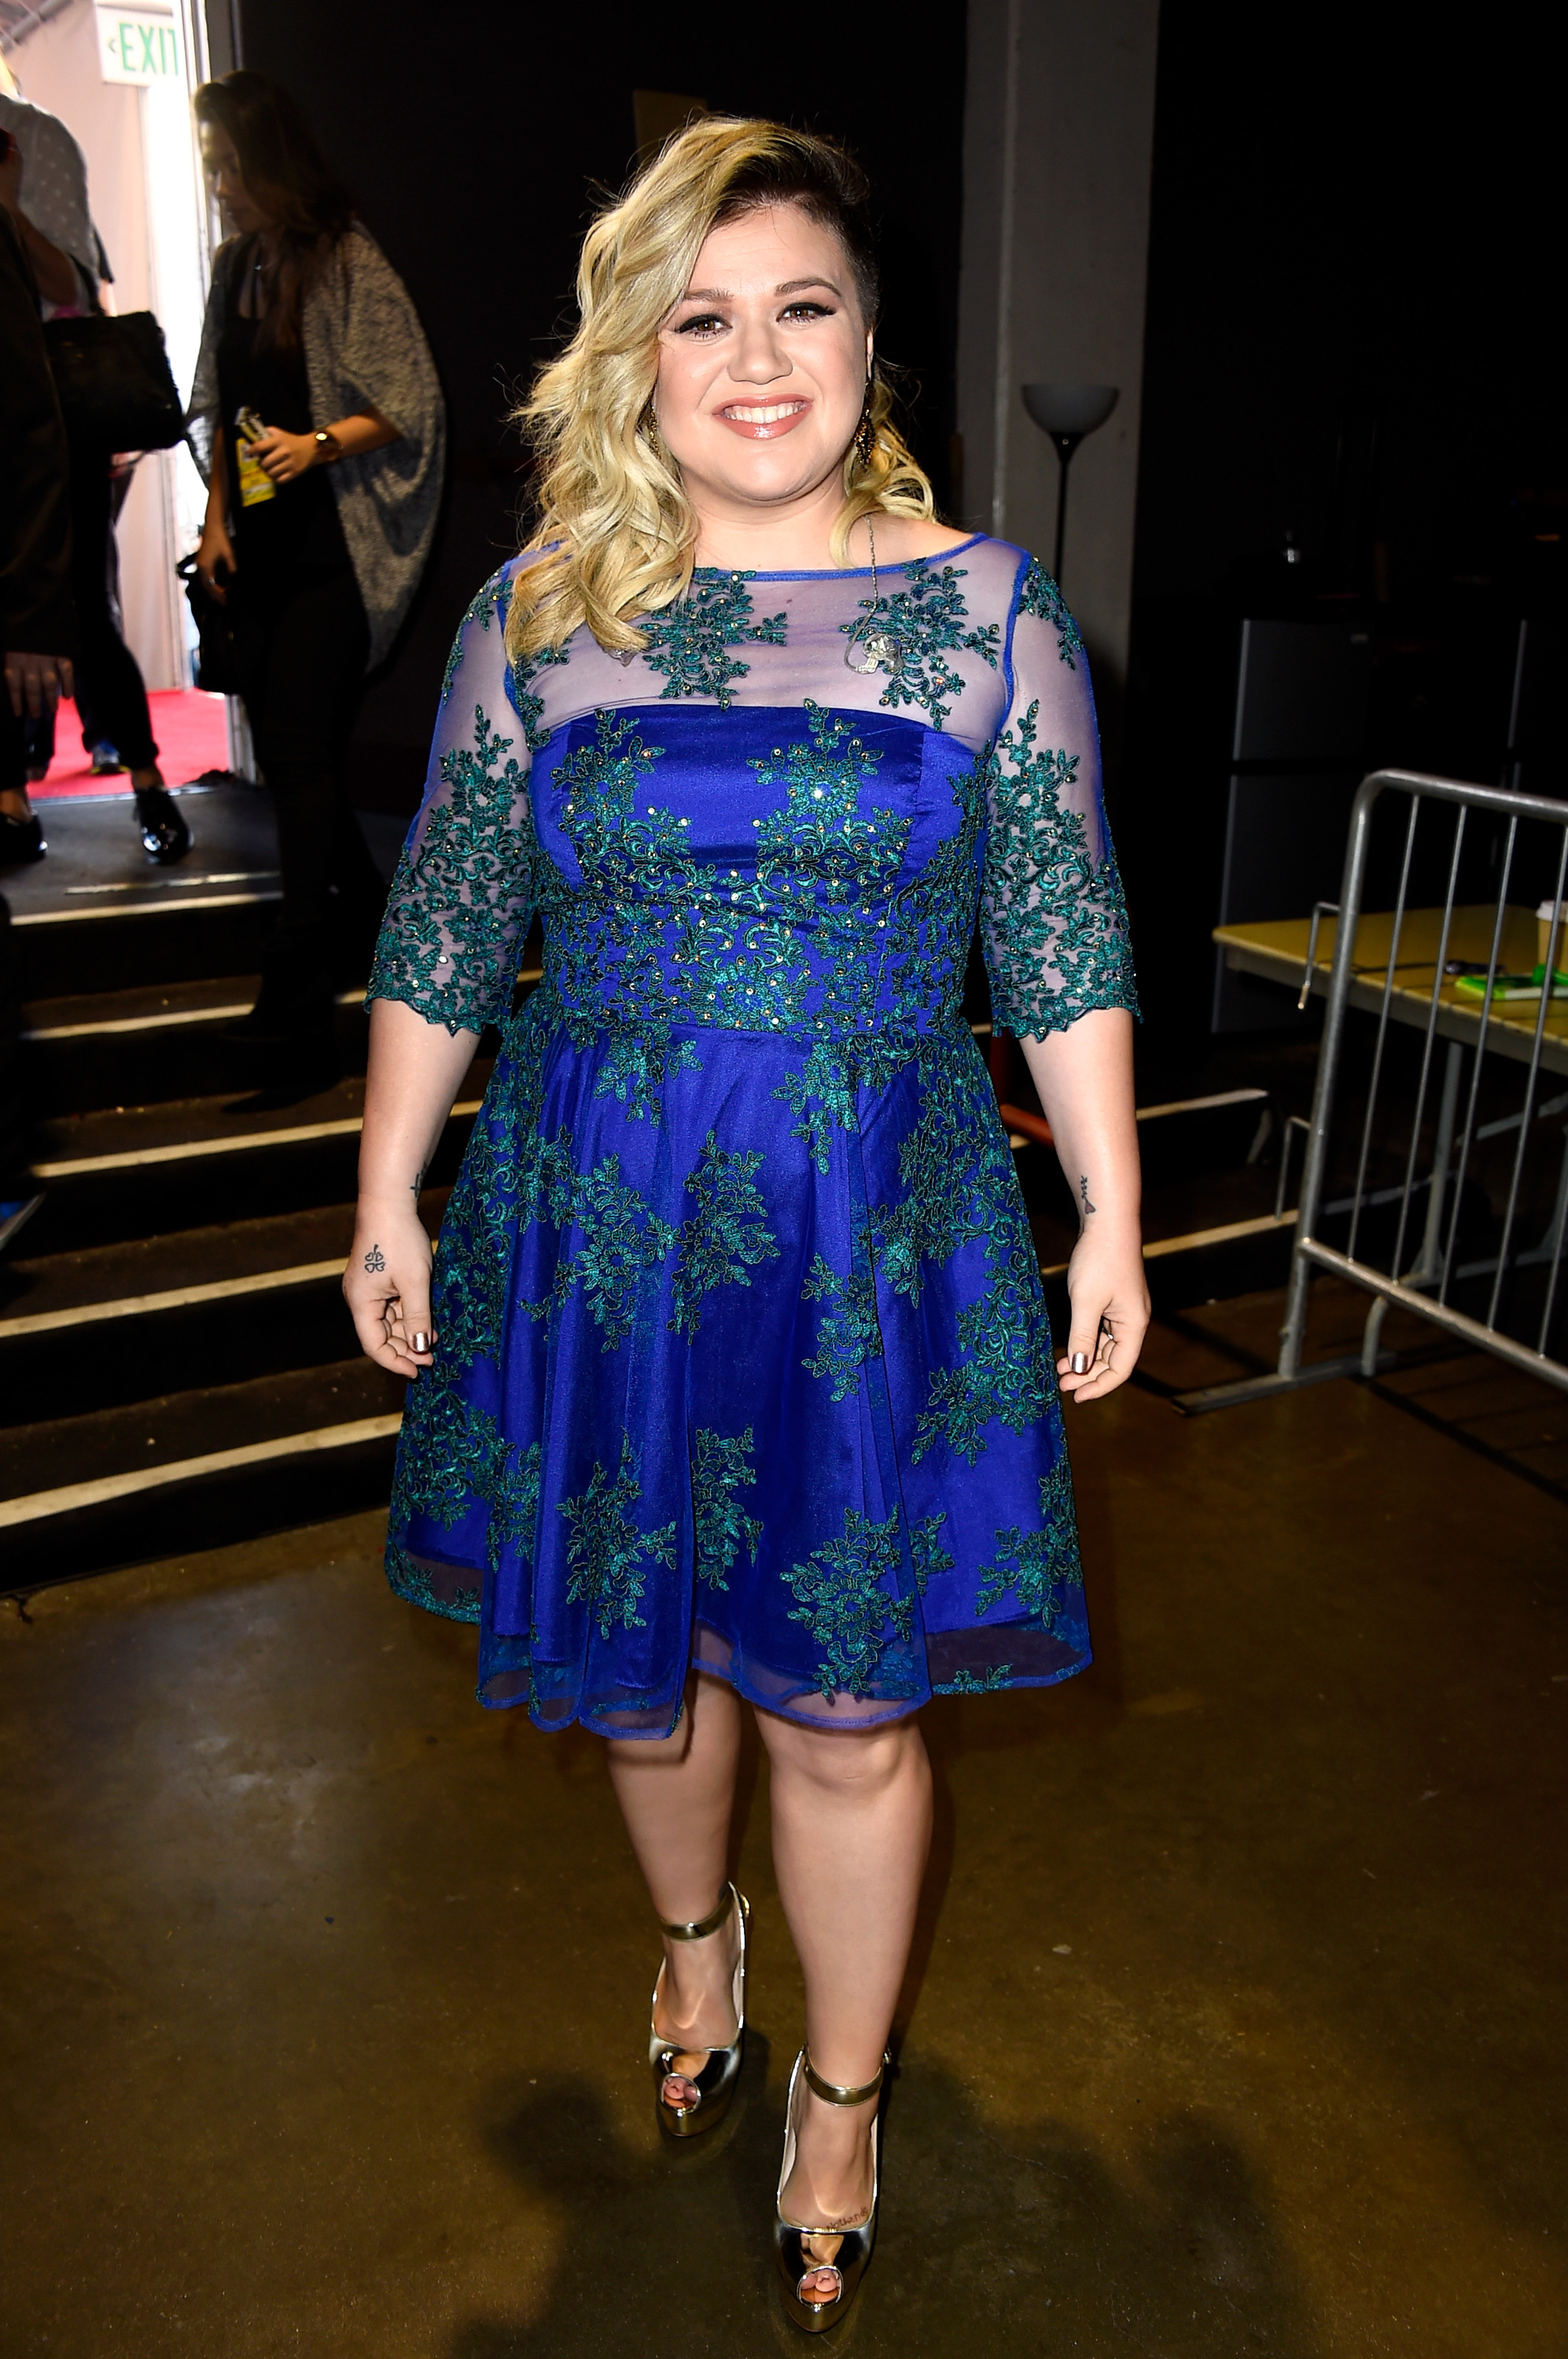 Kelly Clarkson at the 2015 iHeartRadio Music Awards | Source: Getty Images